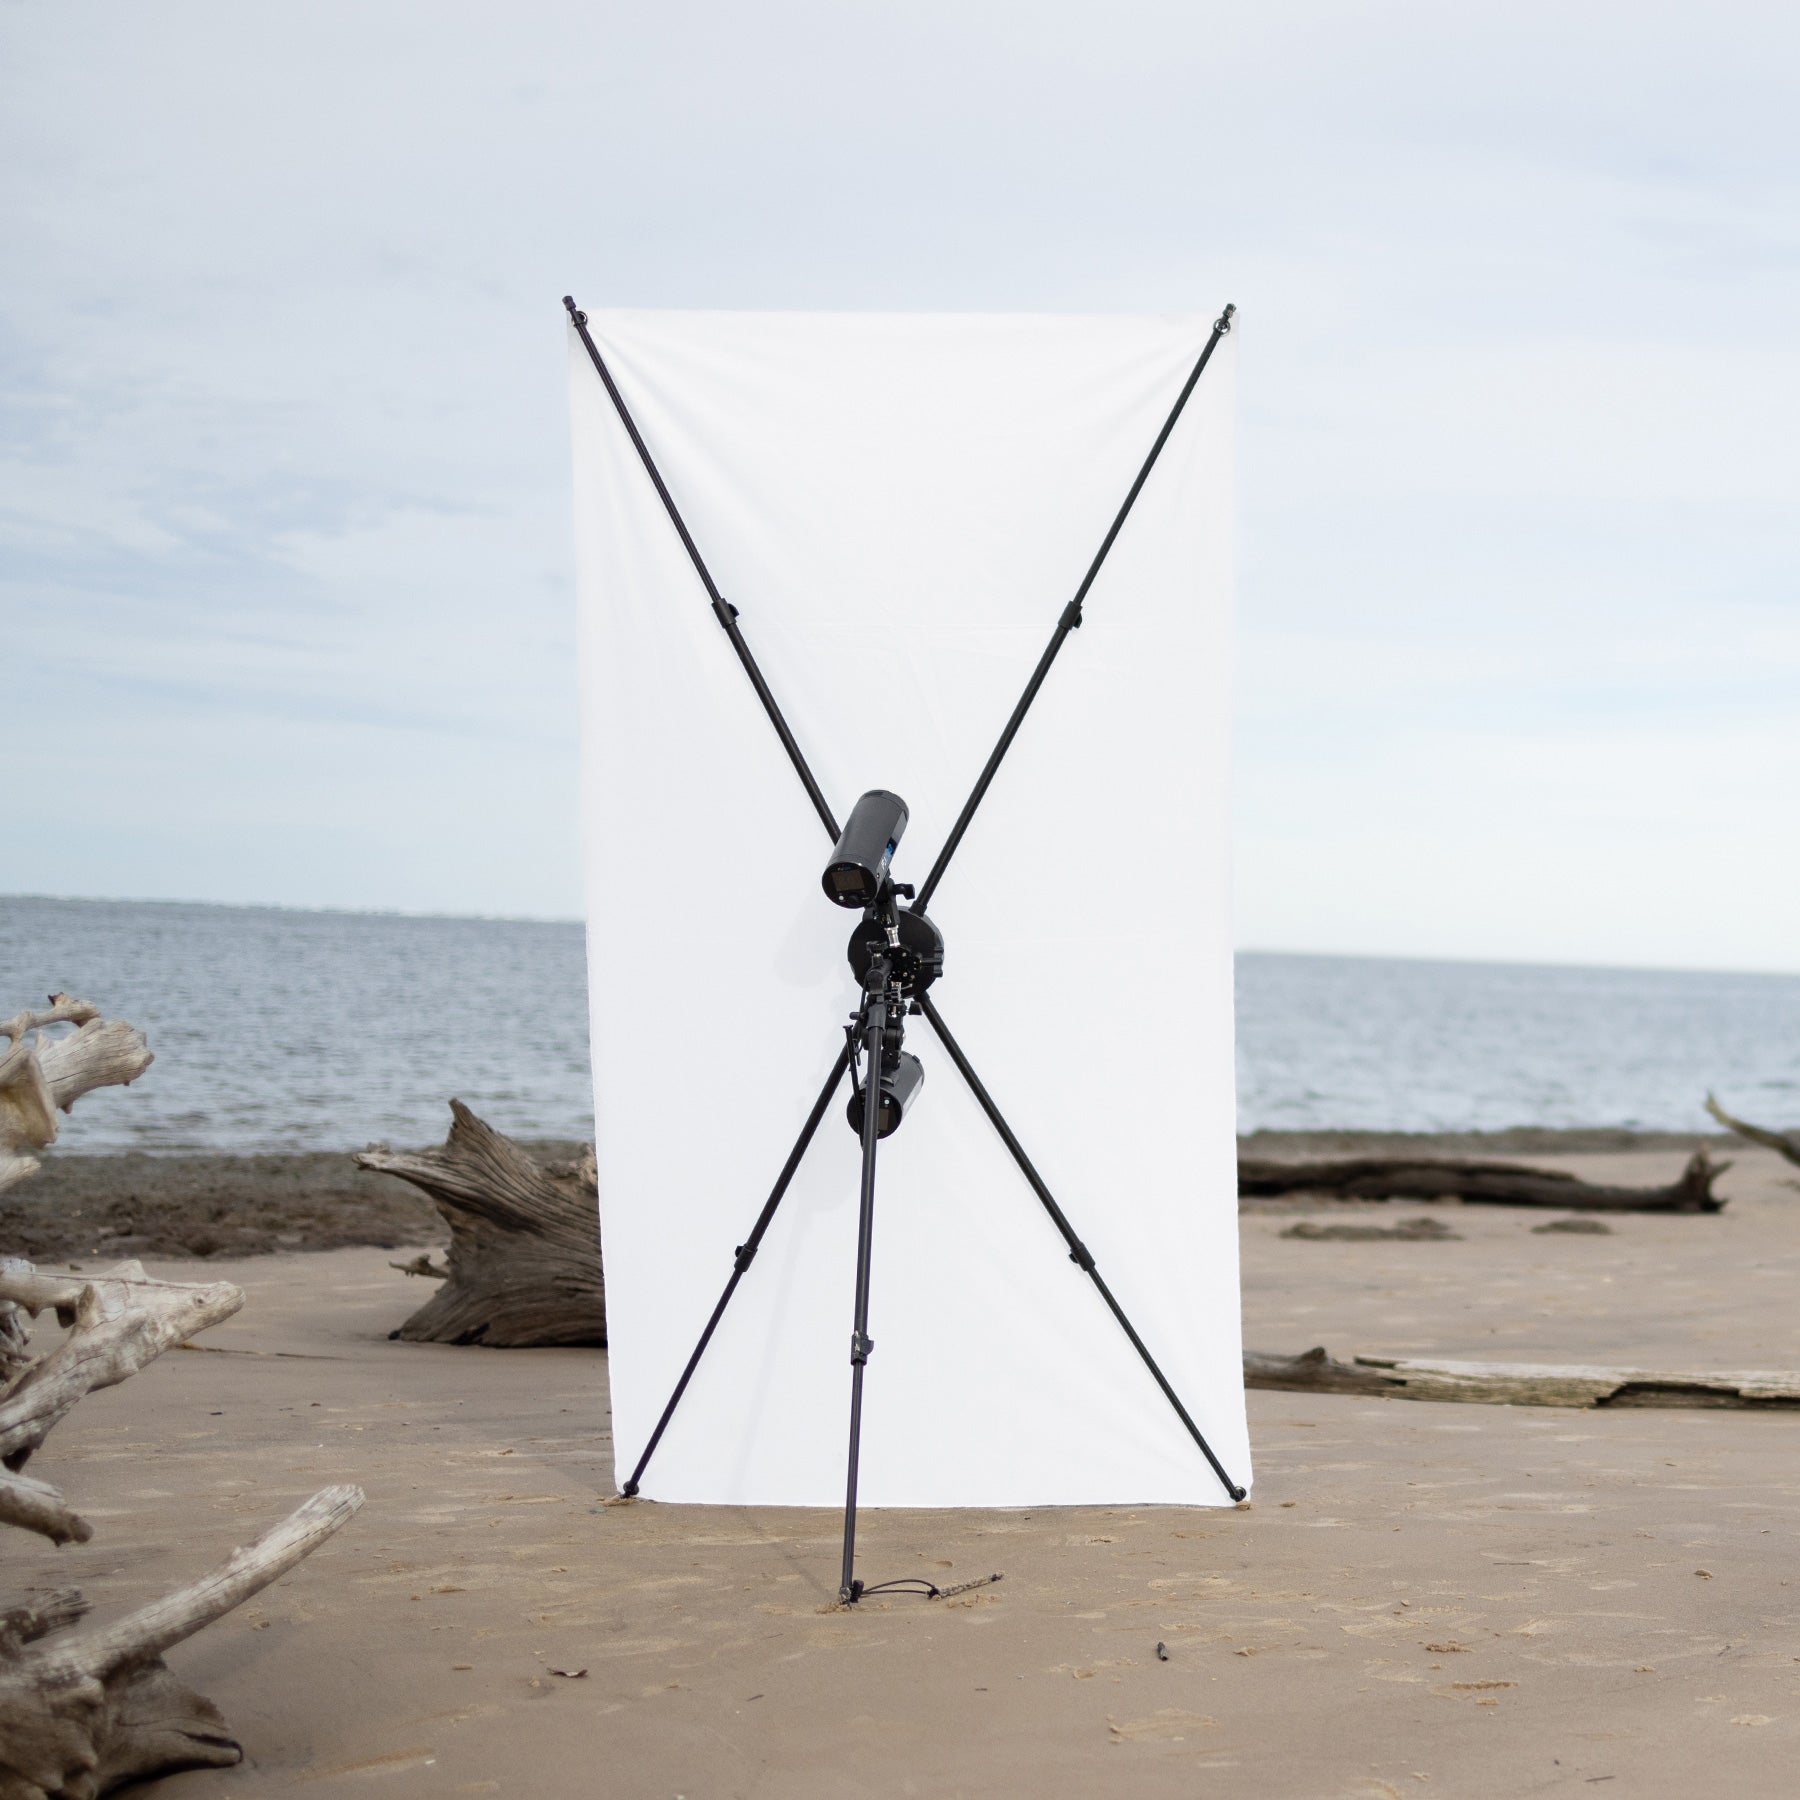 Fusion light control system with FJ200 strobes mounted on the beach